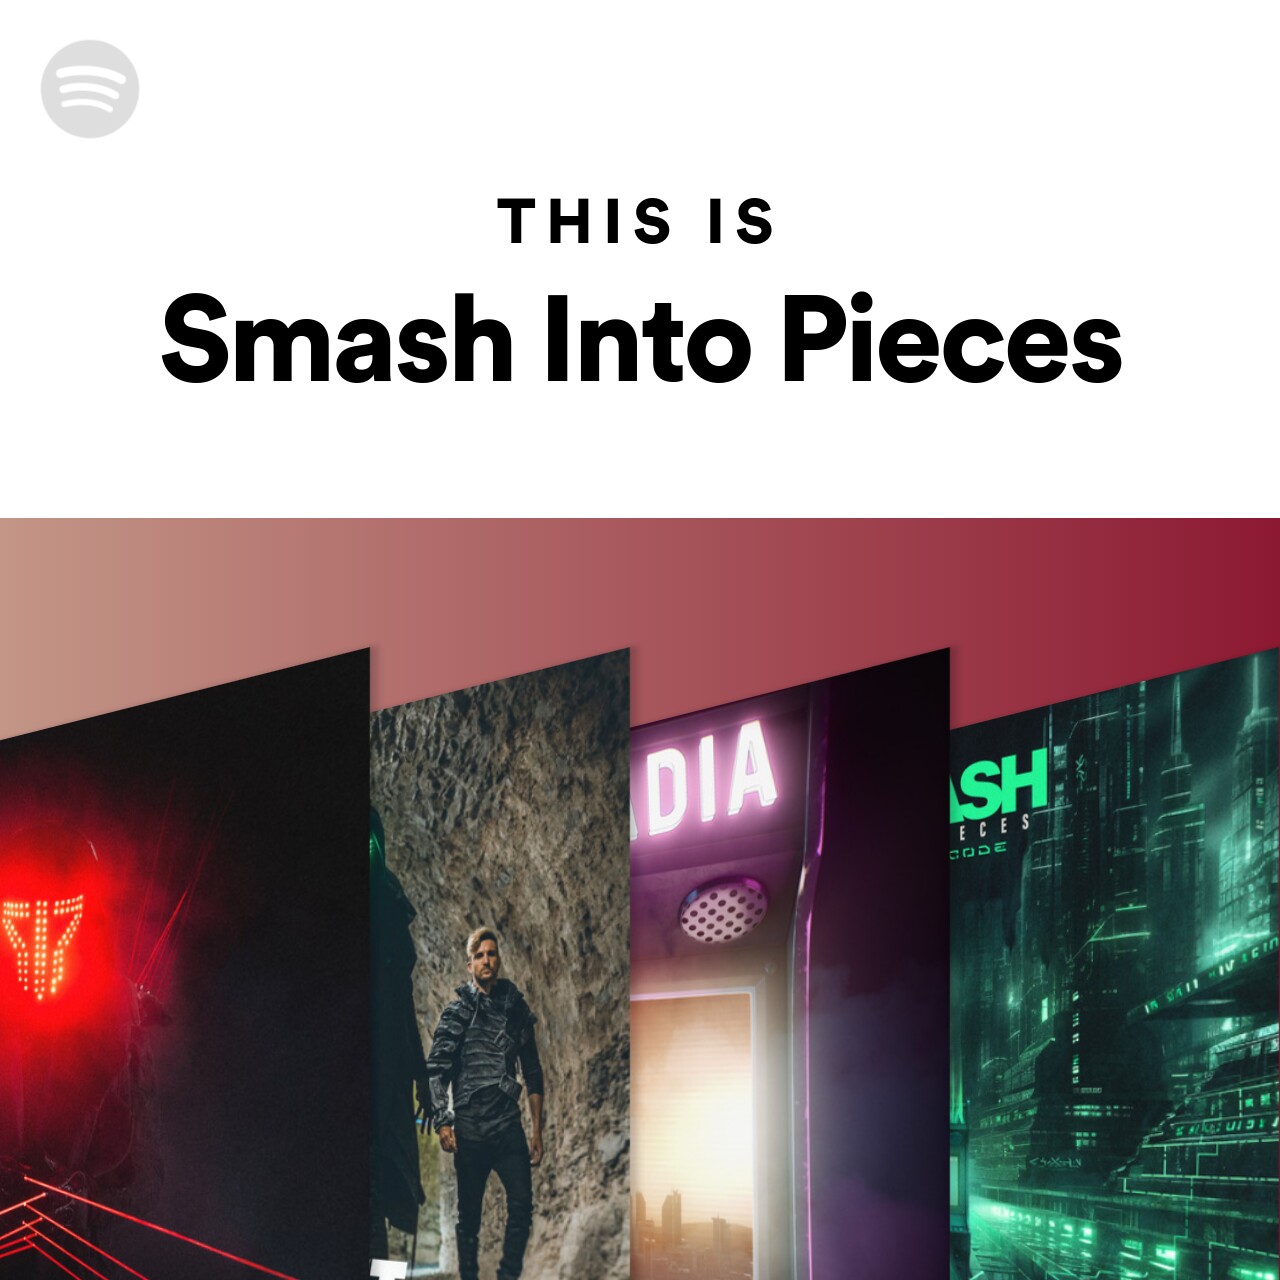 This Is Smash Into Pieces